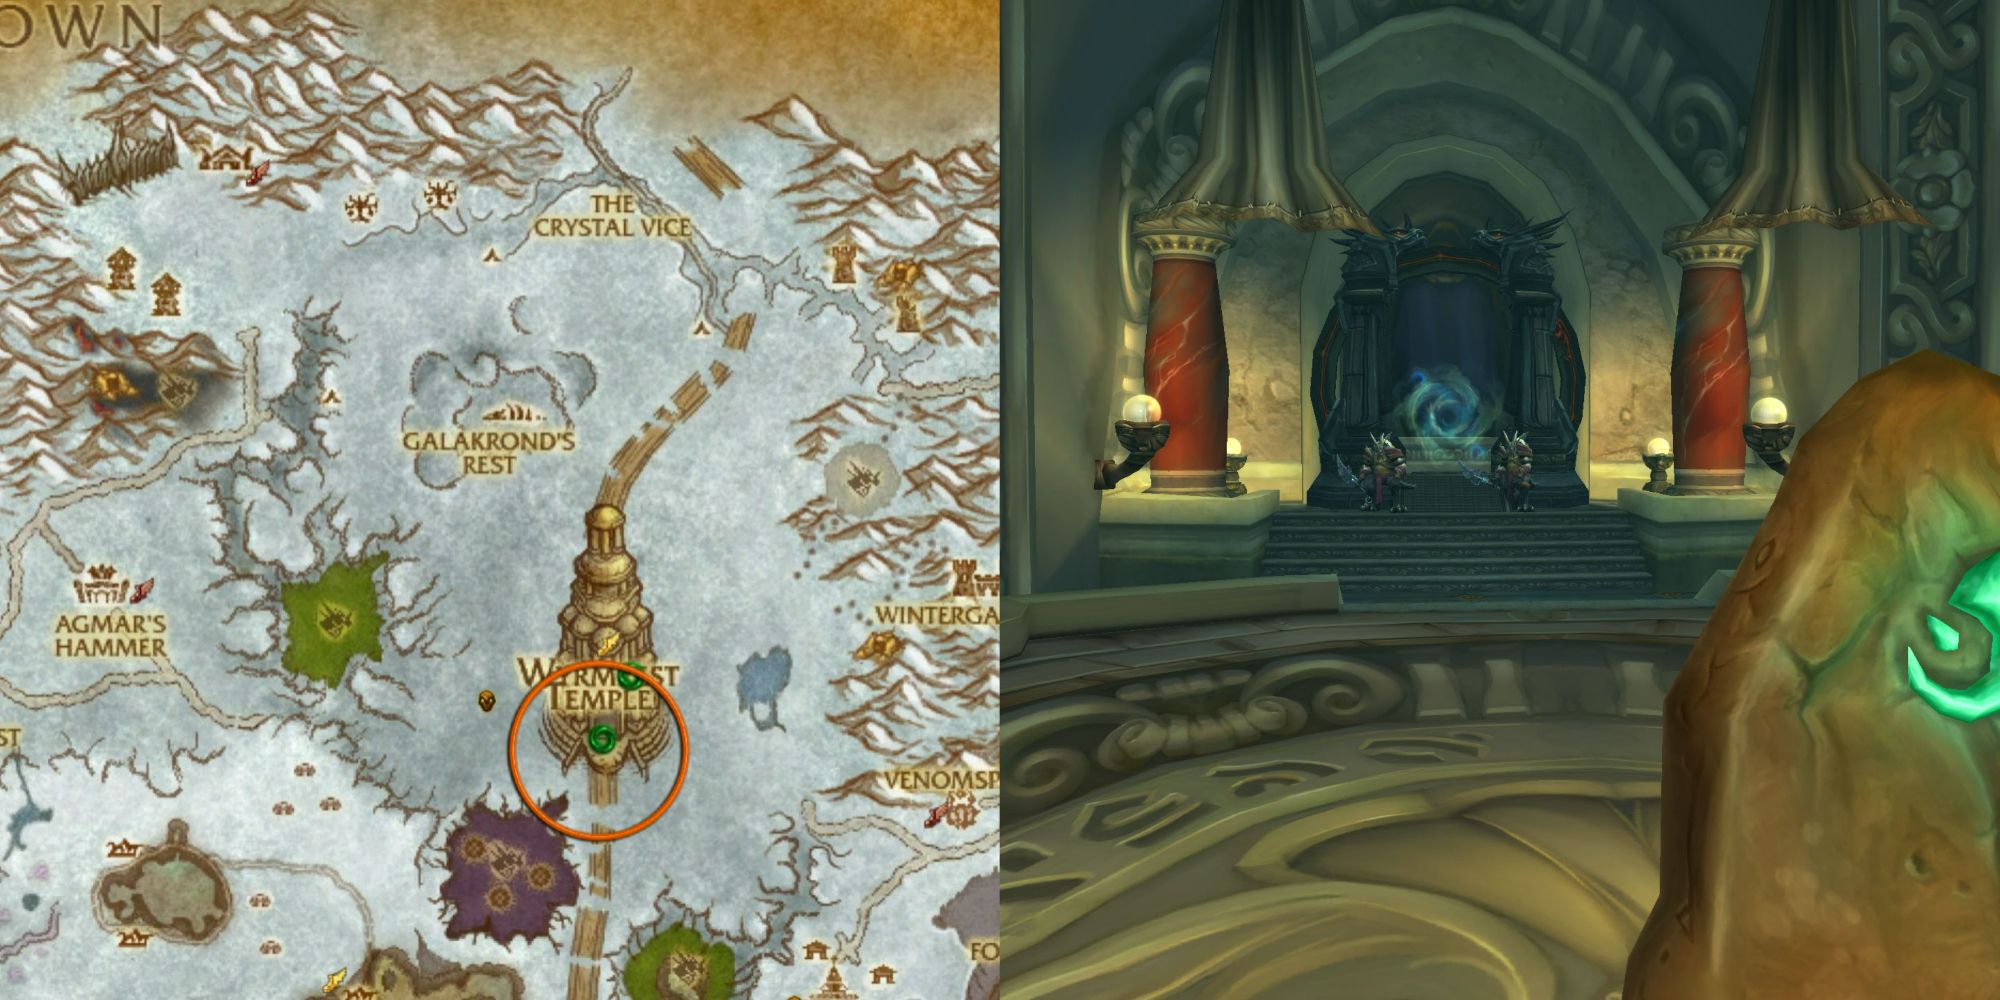 World of Warcraft Wrath of the Lich King split image of Dragonblight map and Obsidian Sanctum entrance